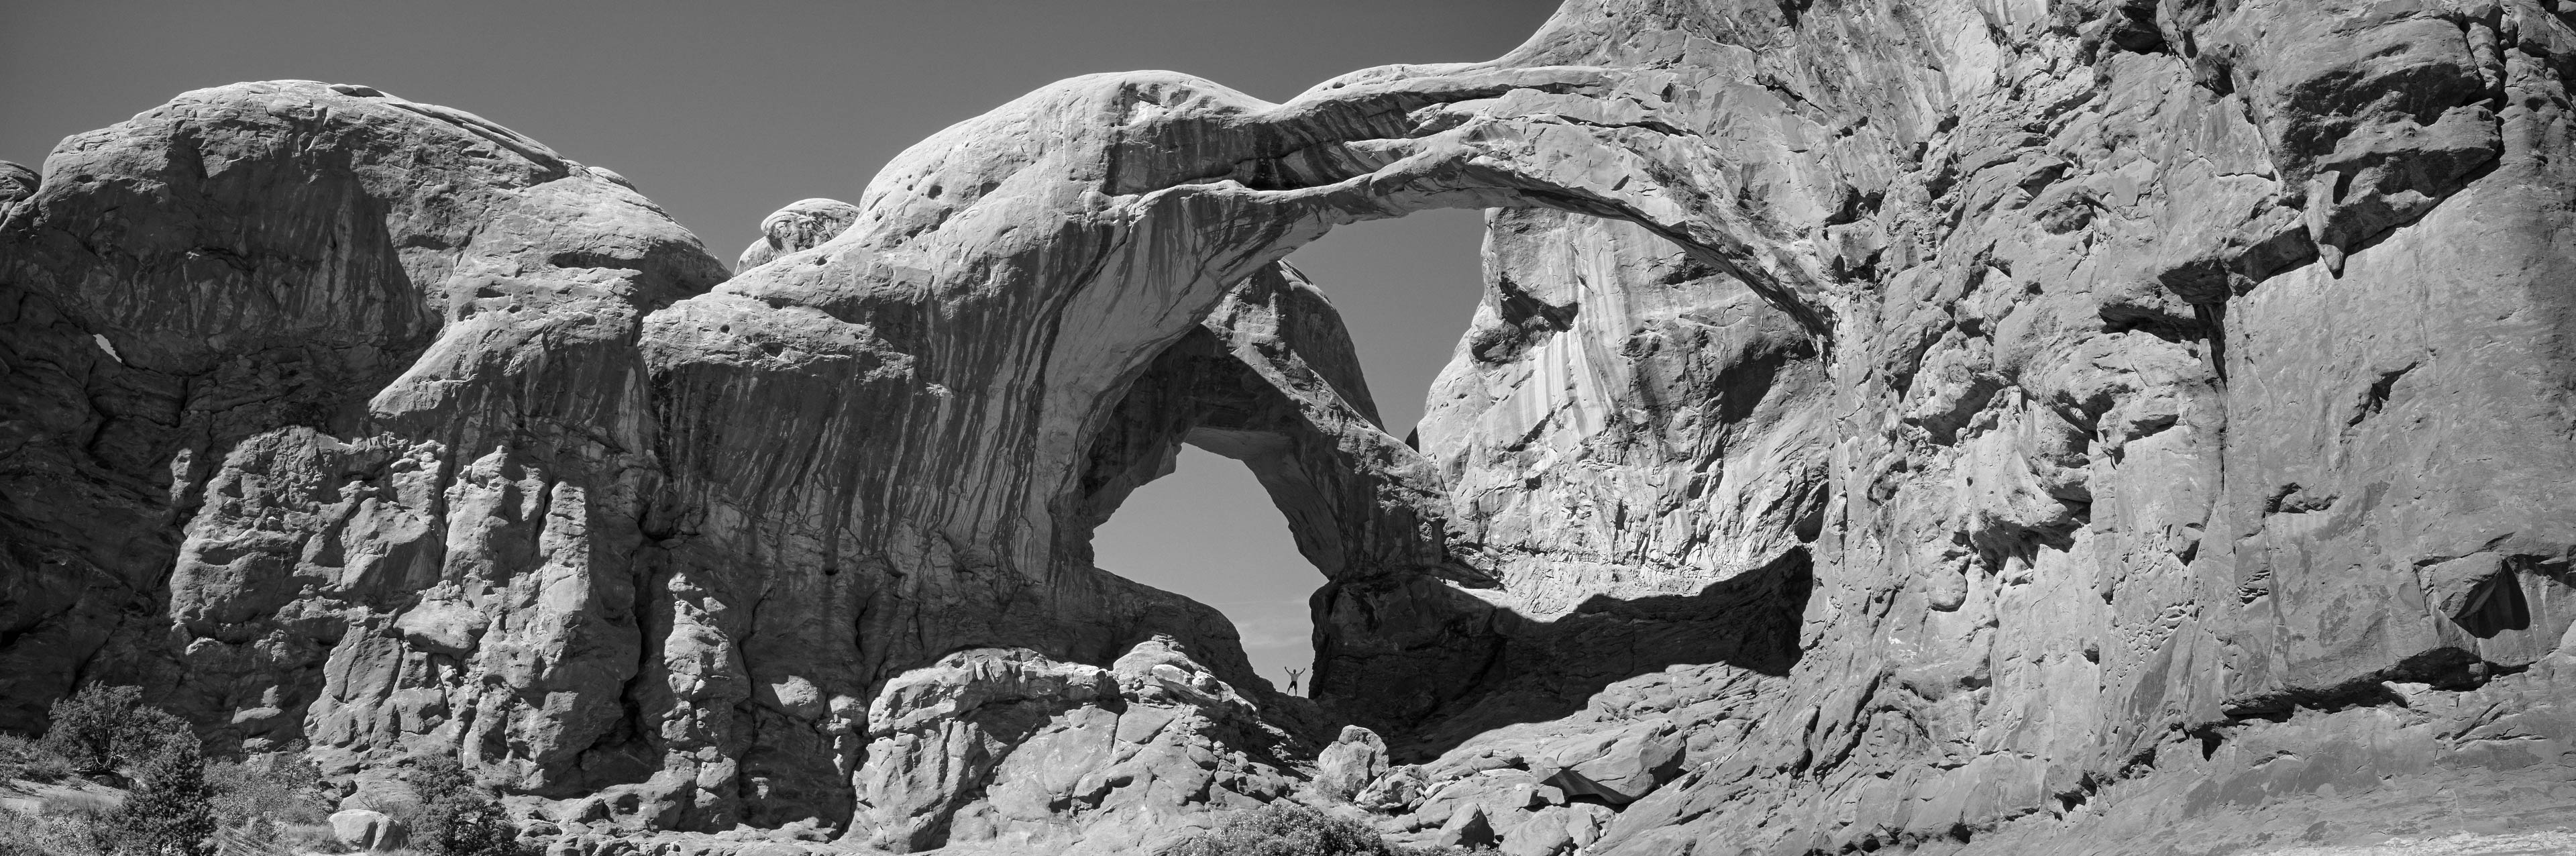 Double Arch, Arches National Park, Utah, USA 